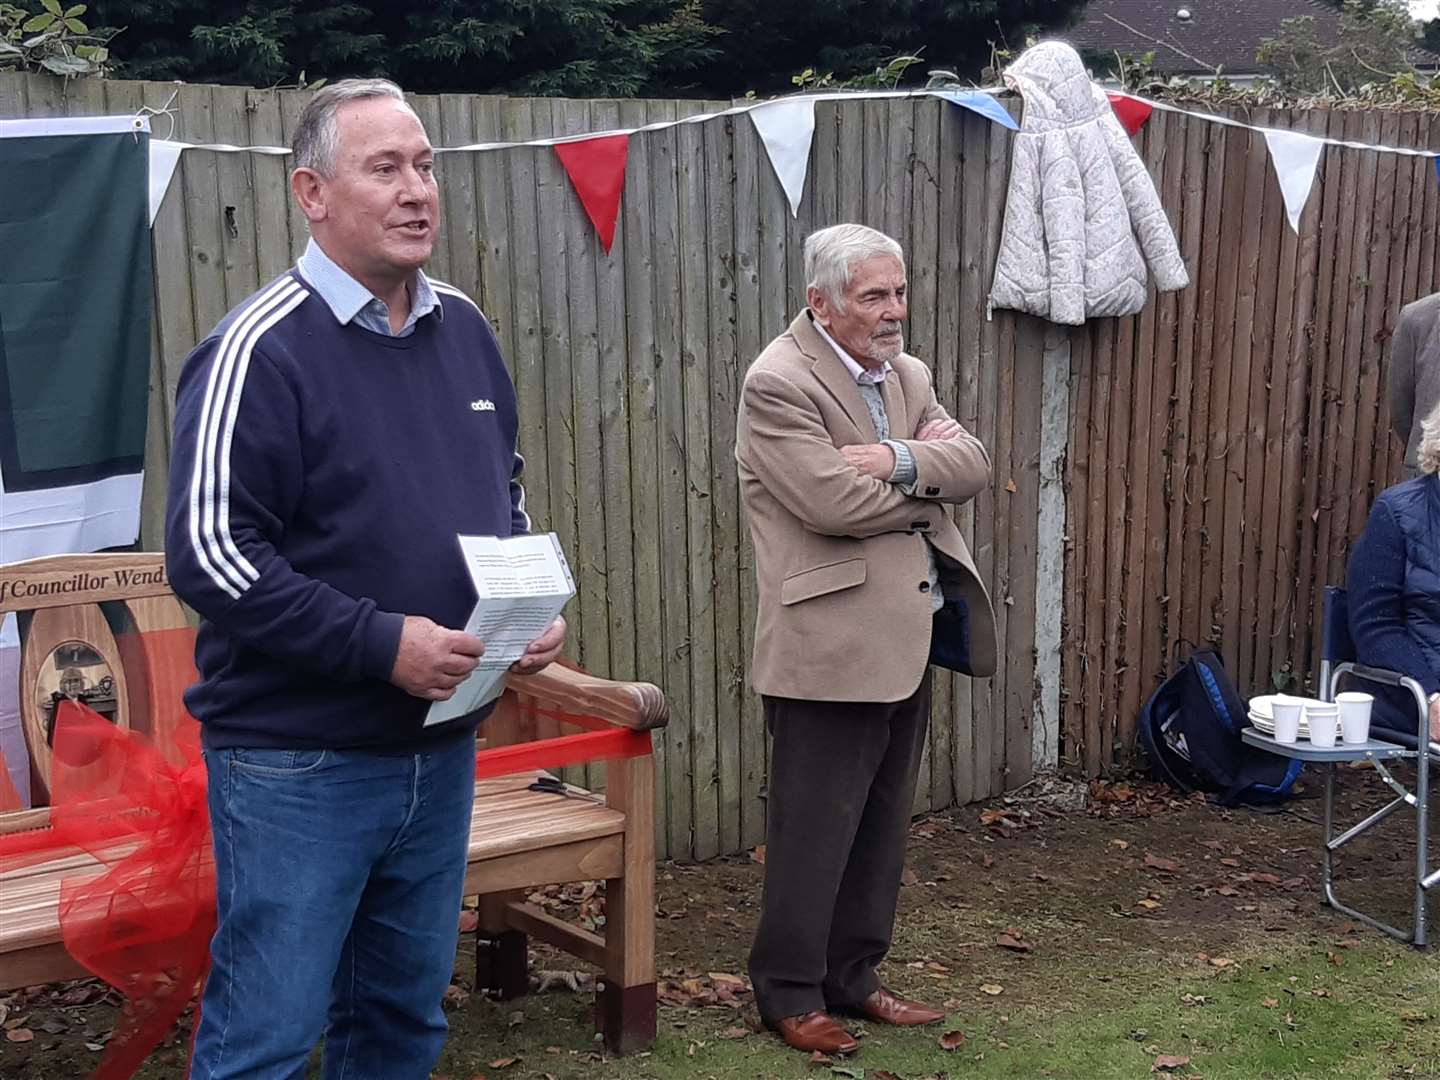 Boxley Parish Council chairman Chris Sheppard addresses residents at the unveiling of a memorial bench, with Bob Hinder alongside